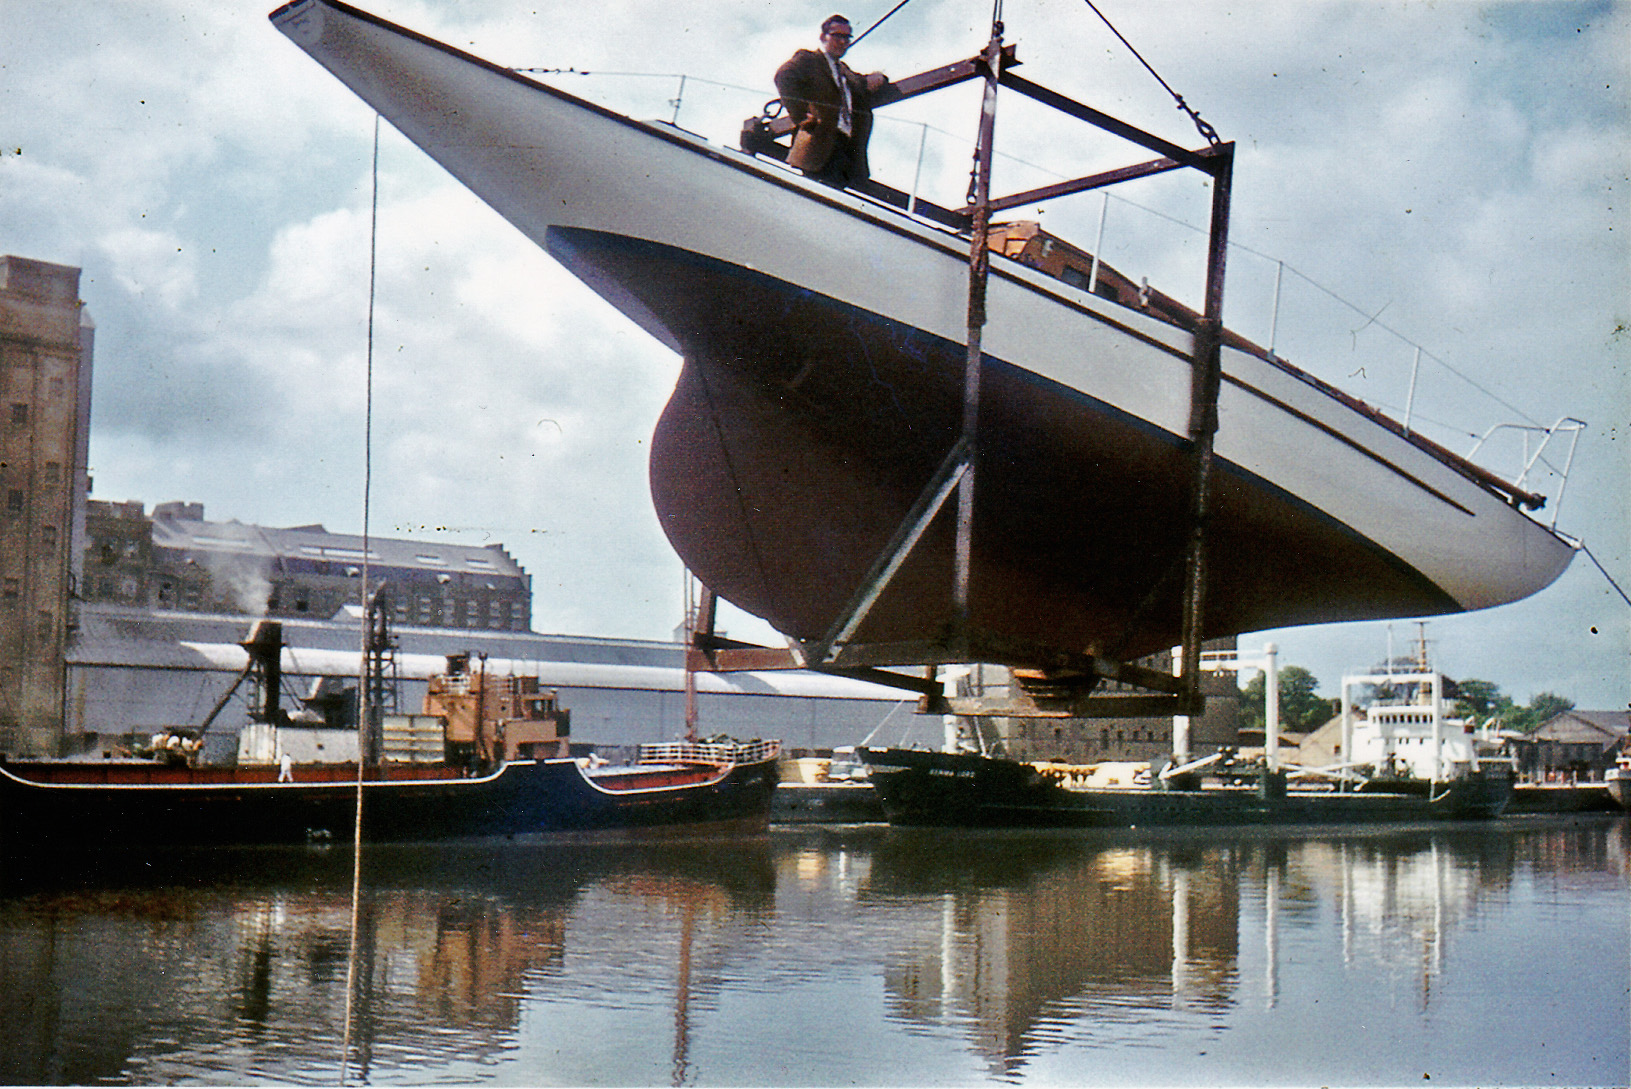 White boat hoisted above a dock in a cradle.